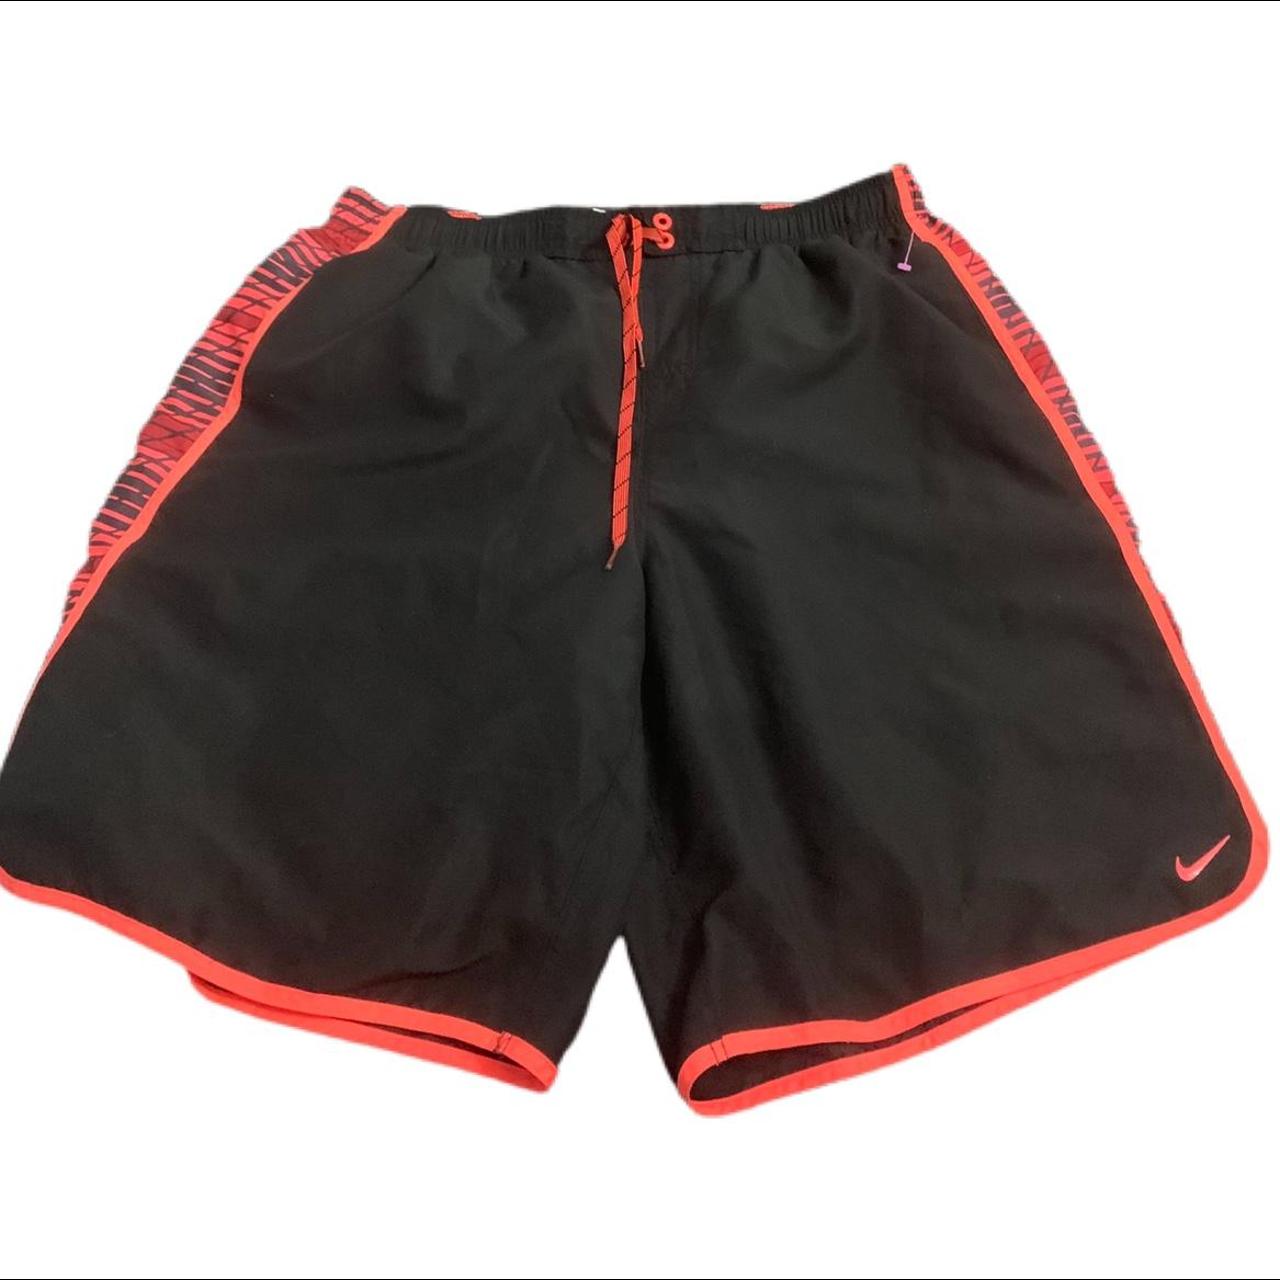 Nike Men's Black and Red Swim-briefs-shorts